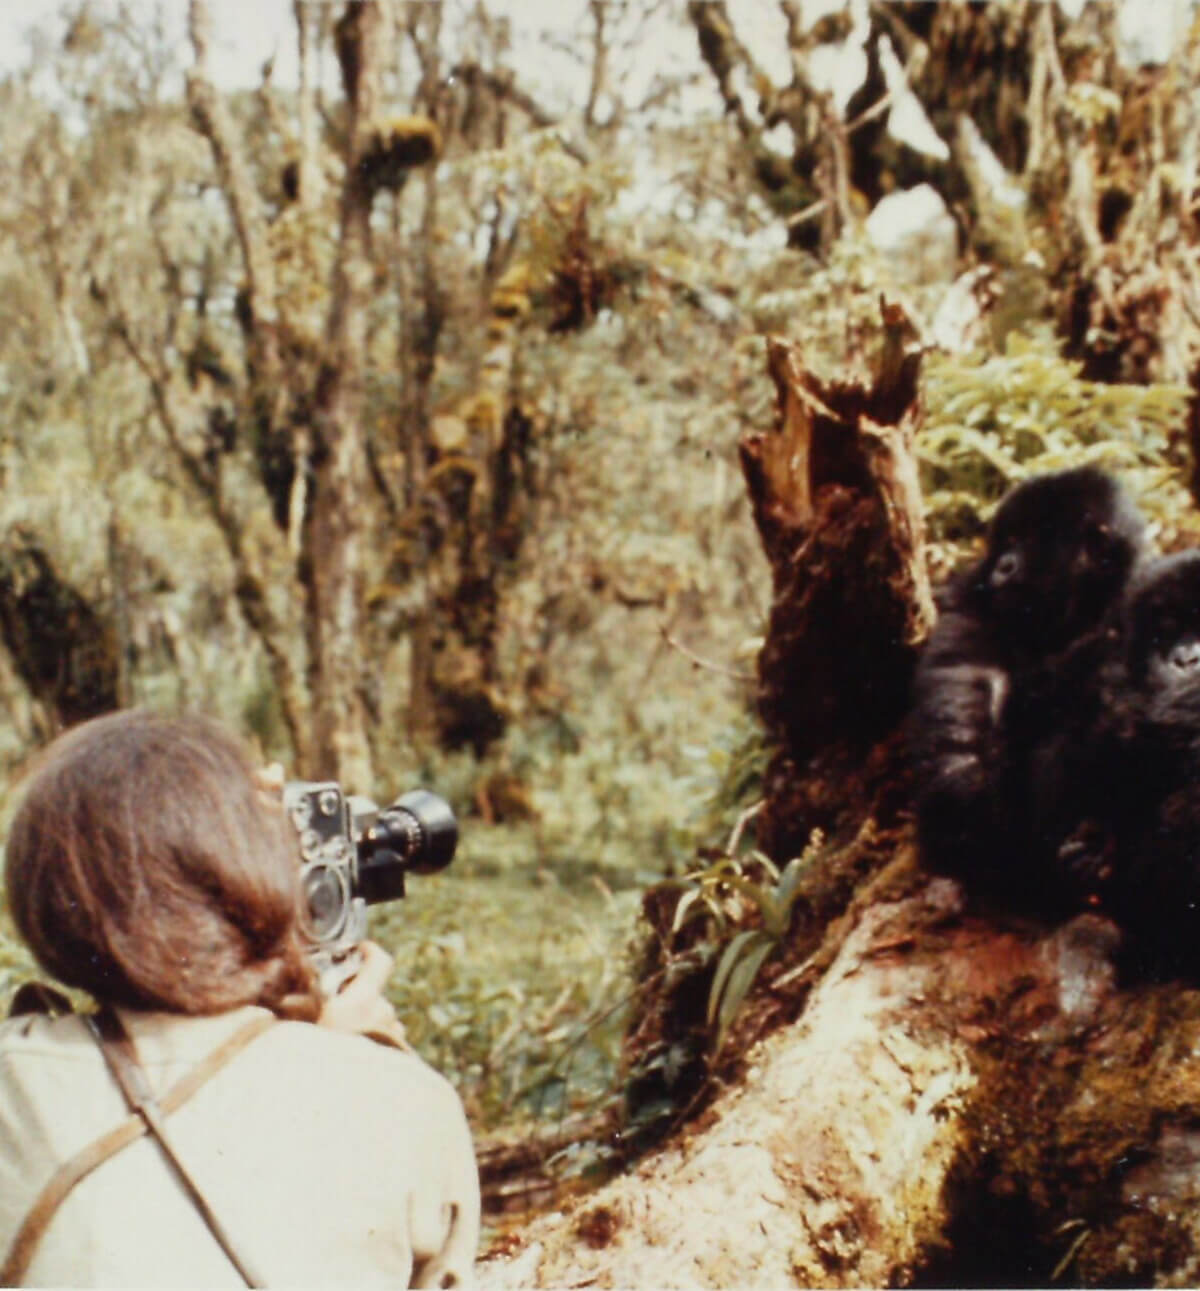 Dian Fossey taking photographs of a gorilla. Image credit: Courtesy of Dian Fossey Gorilla Fund